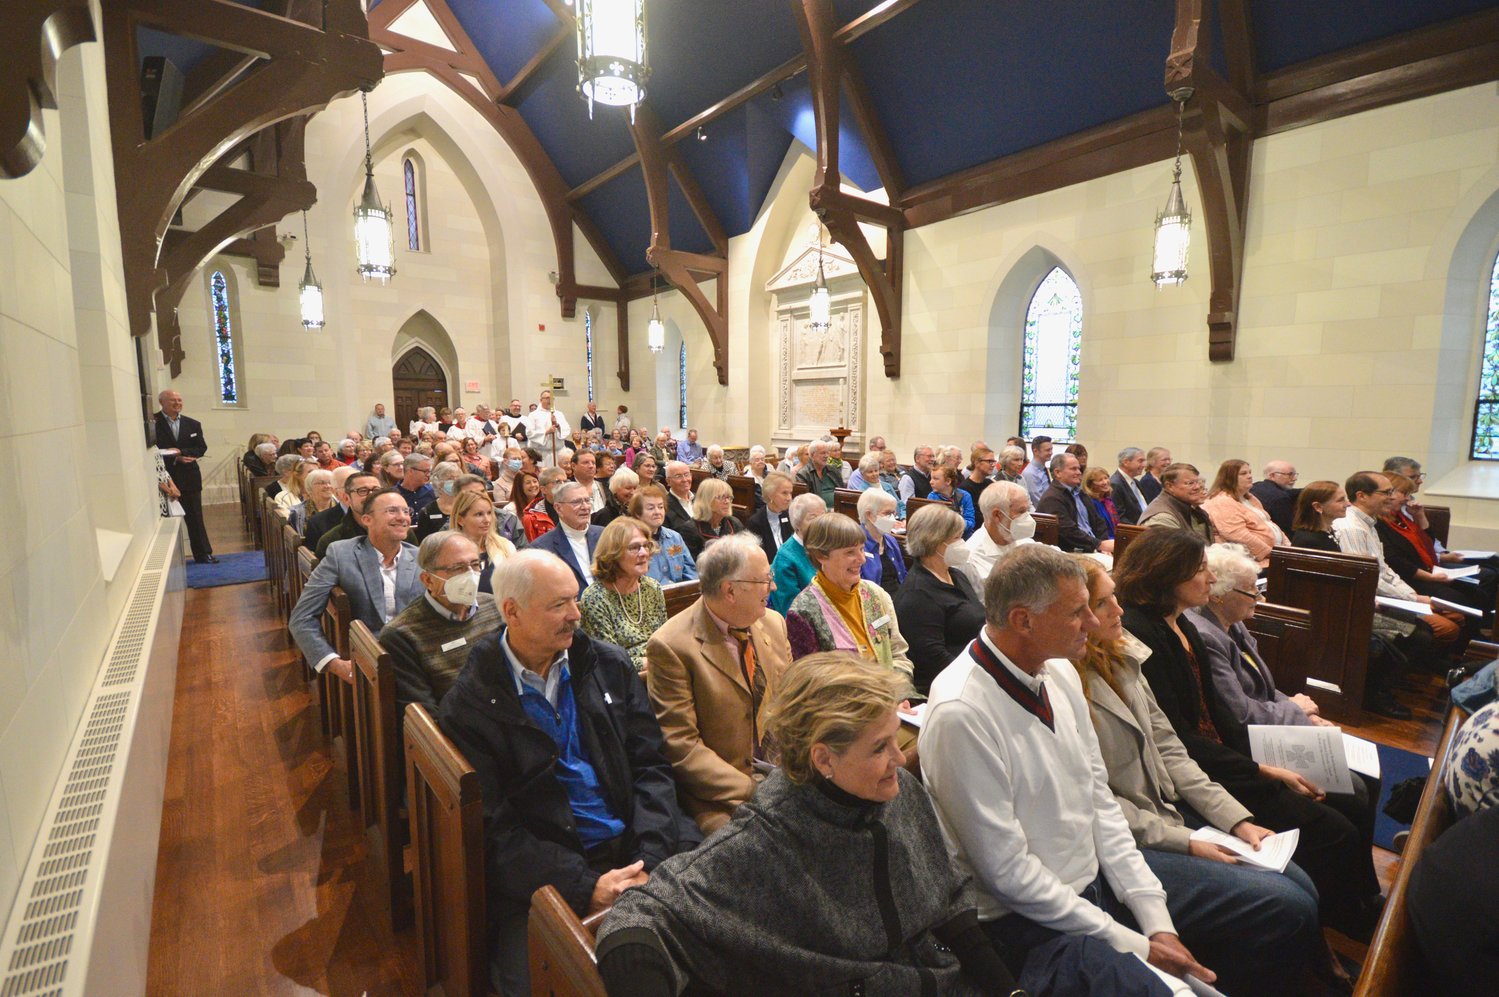 A full house of about 165 parishioners came out Nov. 13 to celebrate the newly restored historic chapel at St. Mary’s Episcopal Church.